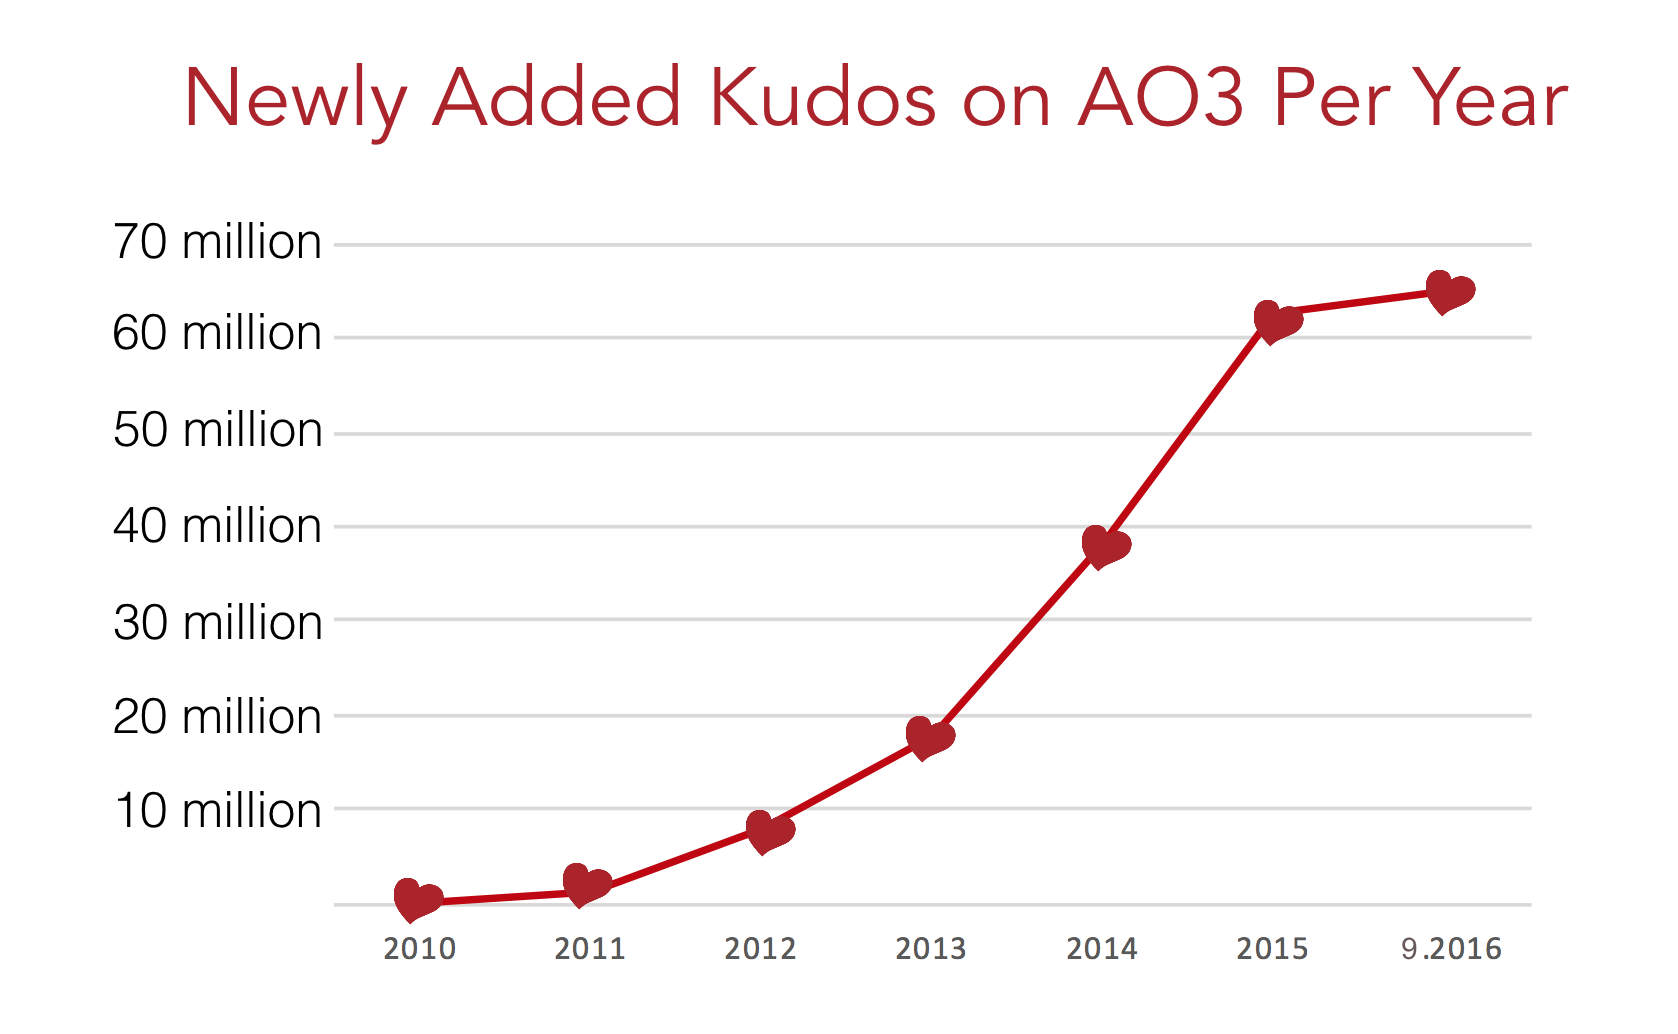 Kudos growth graph on AO3, from zero in 2010 to over 60 million as of September 2016.